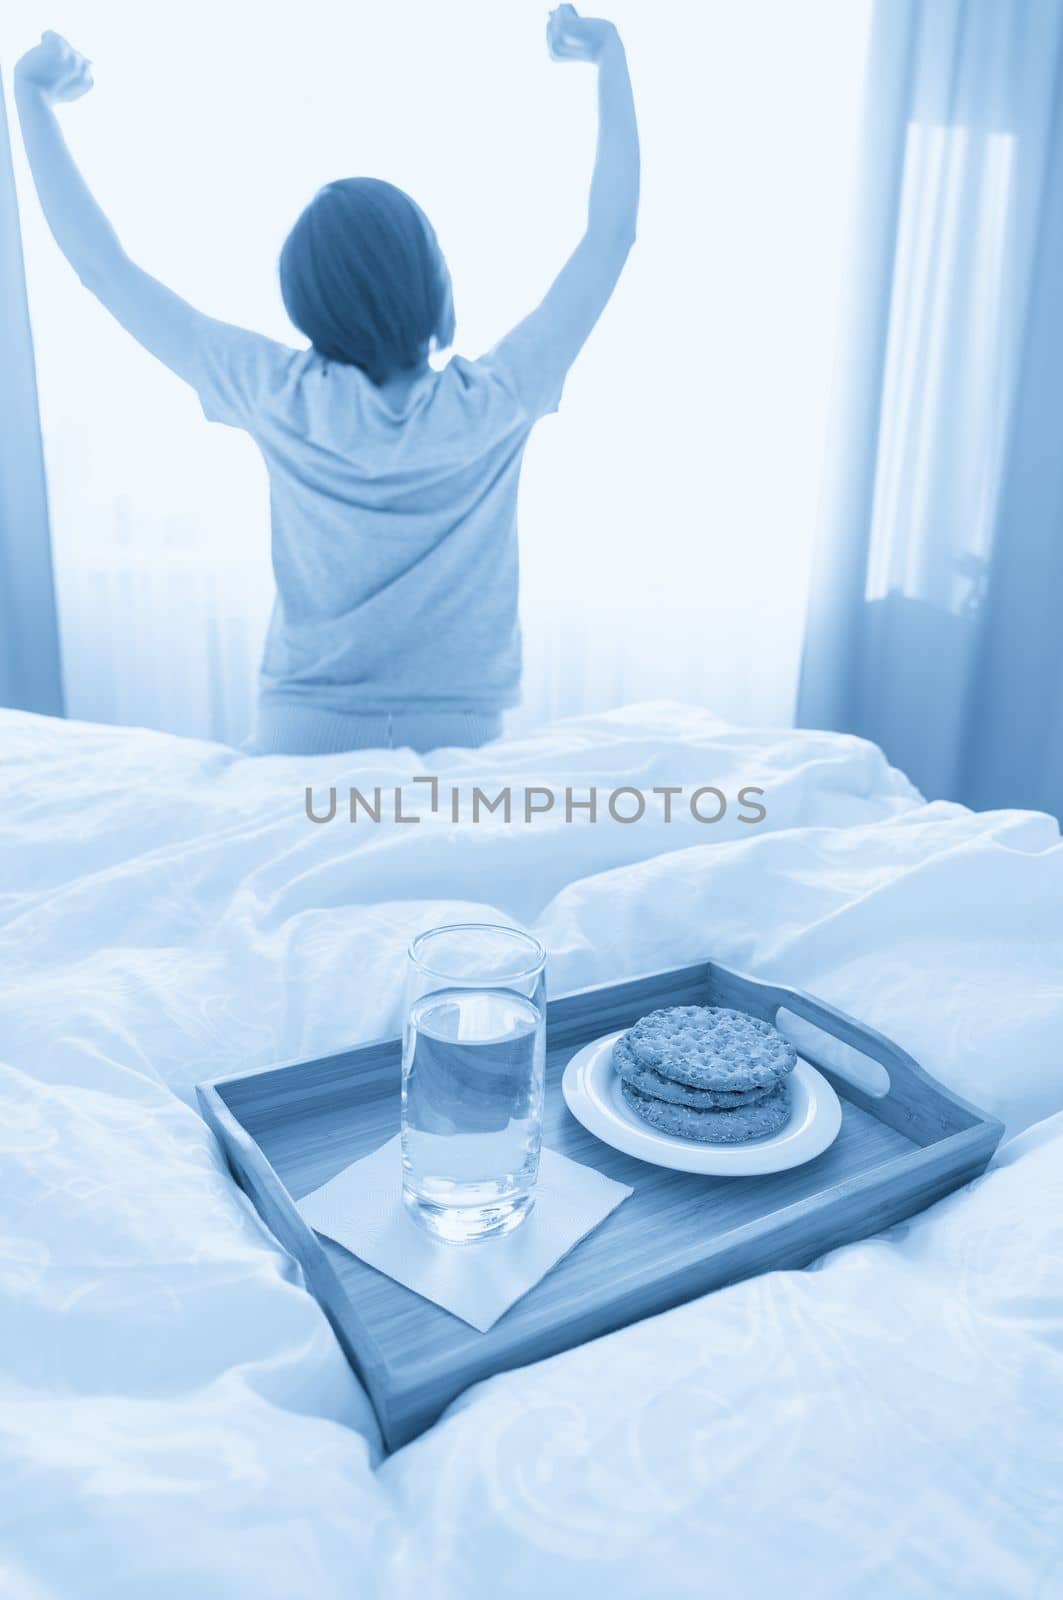 Tray with breakfast on a bed in a hotel room